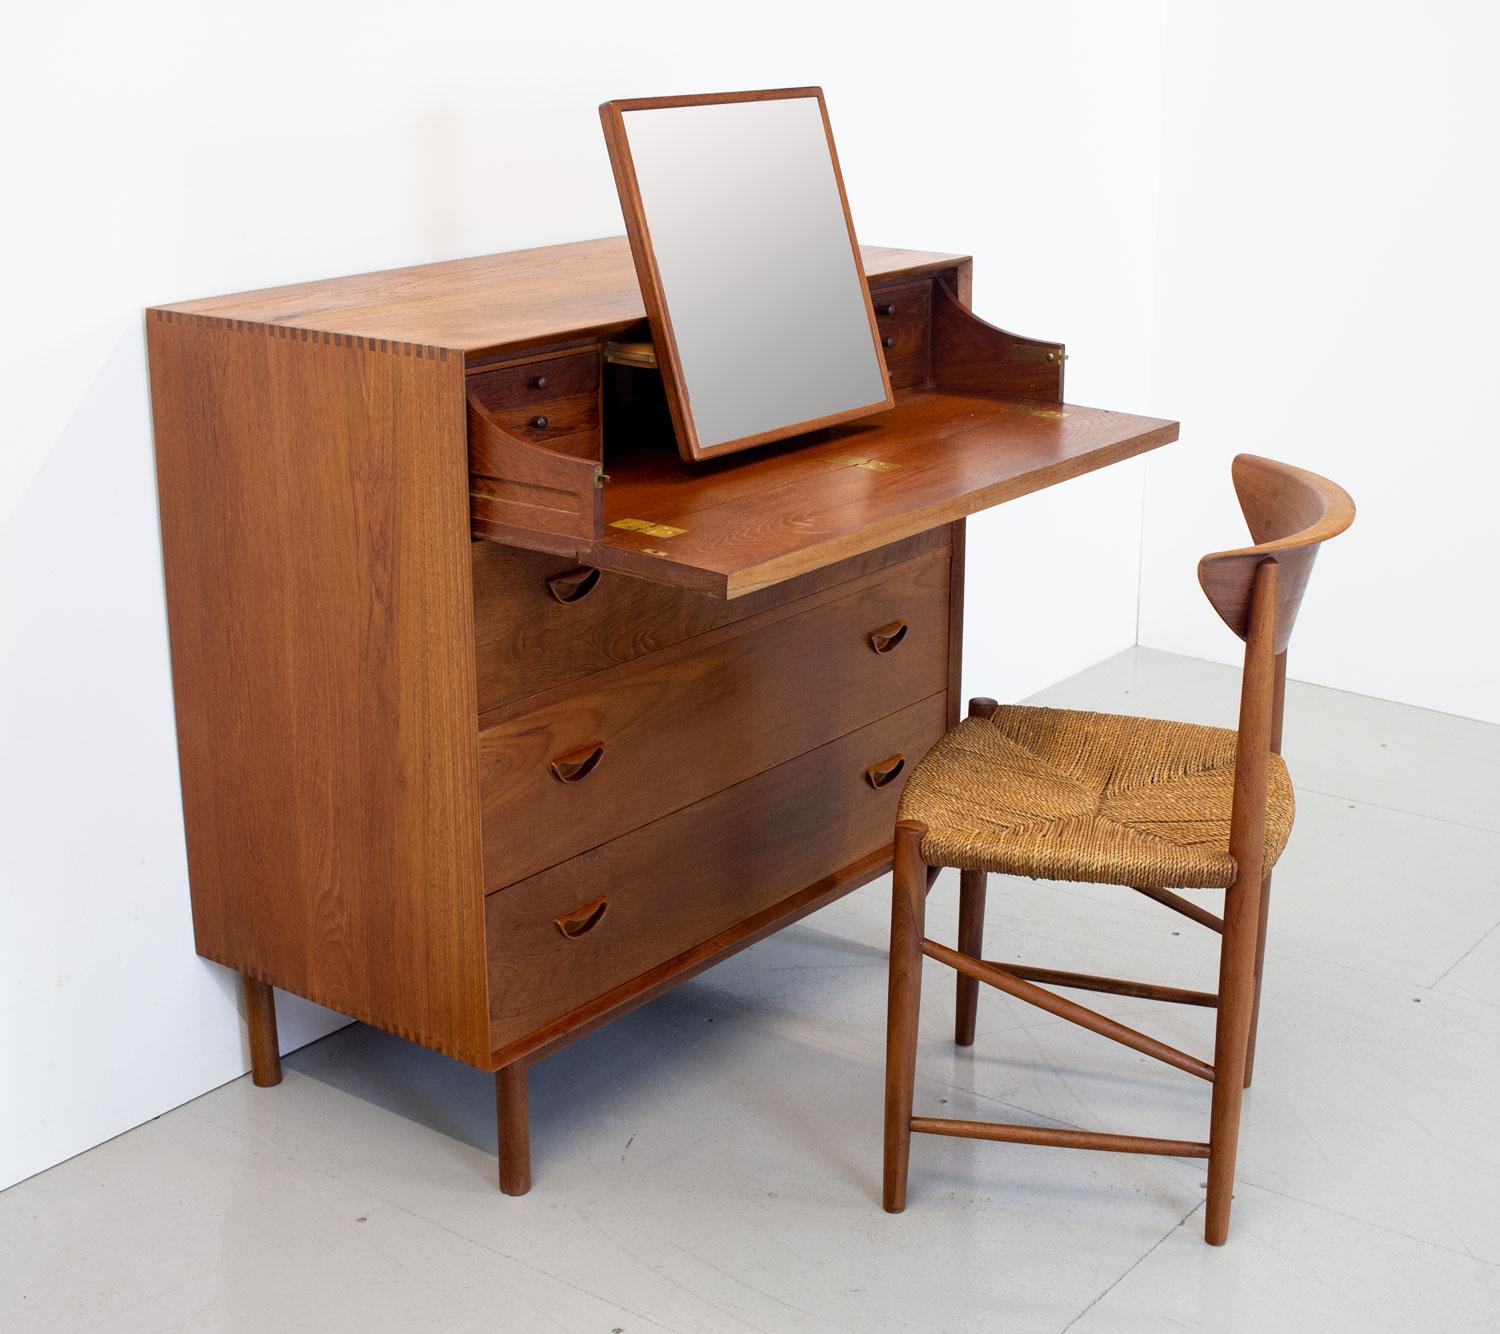 A lovely example of a Soborg model 307 vanity chest designed by Peter Hvidt and Orla Mølgaard Nielsen in the 1956. This beautiful piece is incredibly well made using solid teak with carved handles and on this particular model the top drawer front